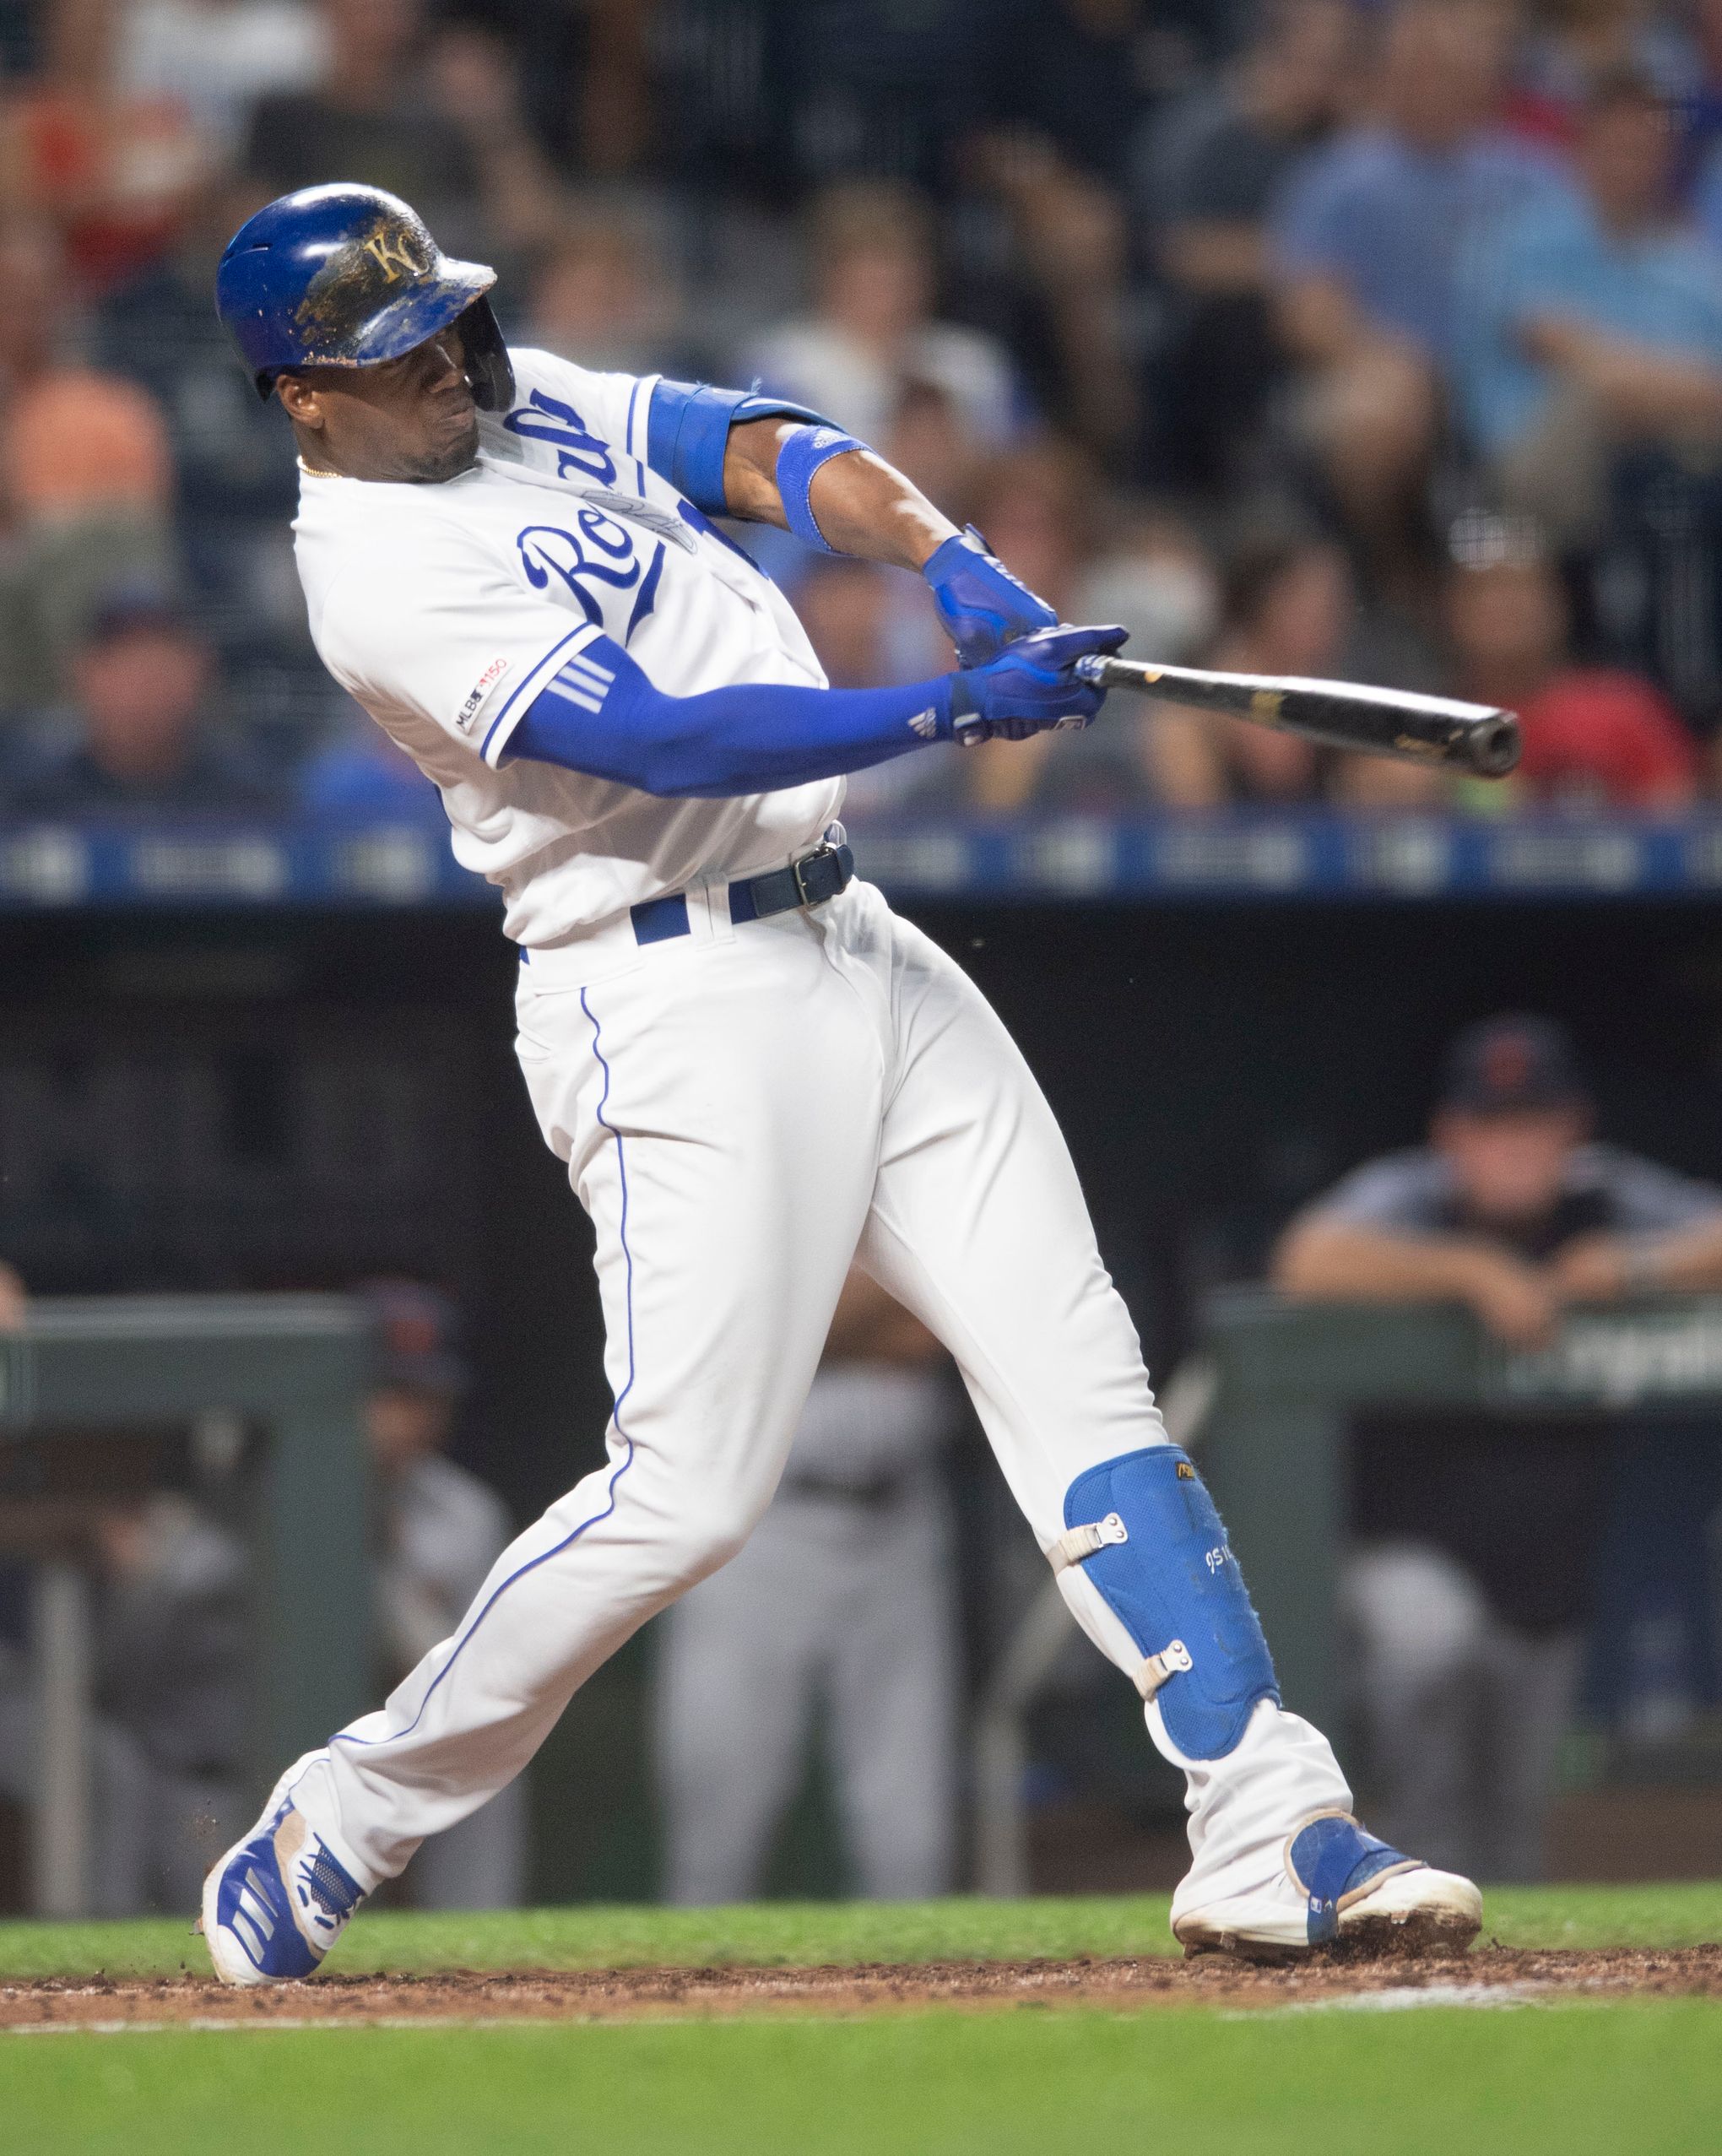 Moustakas helps Royals top Tigers, win series